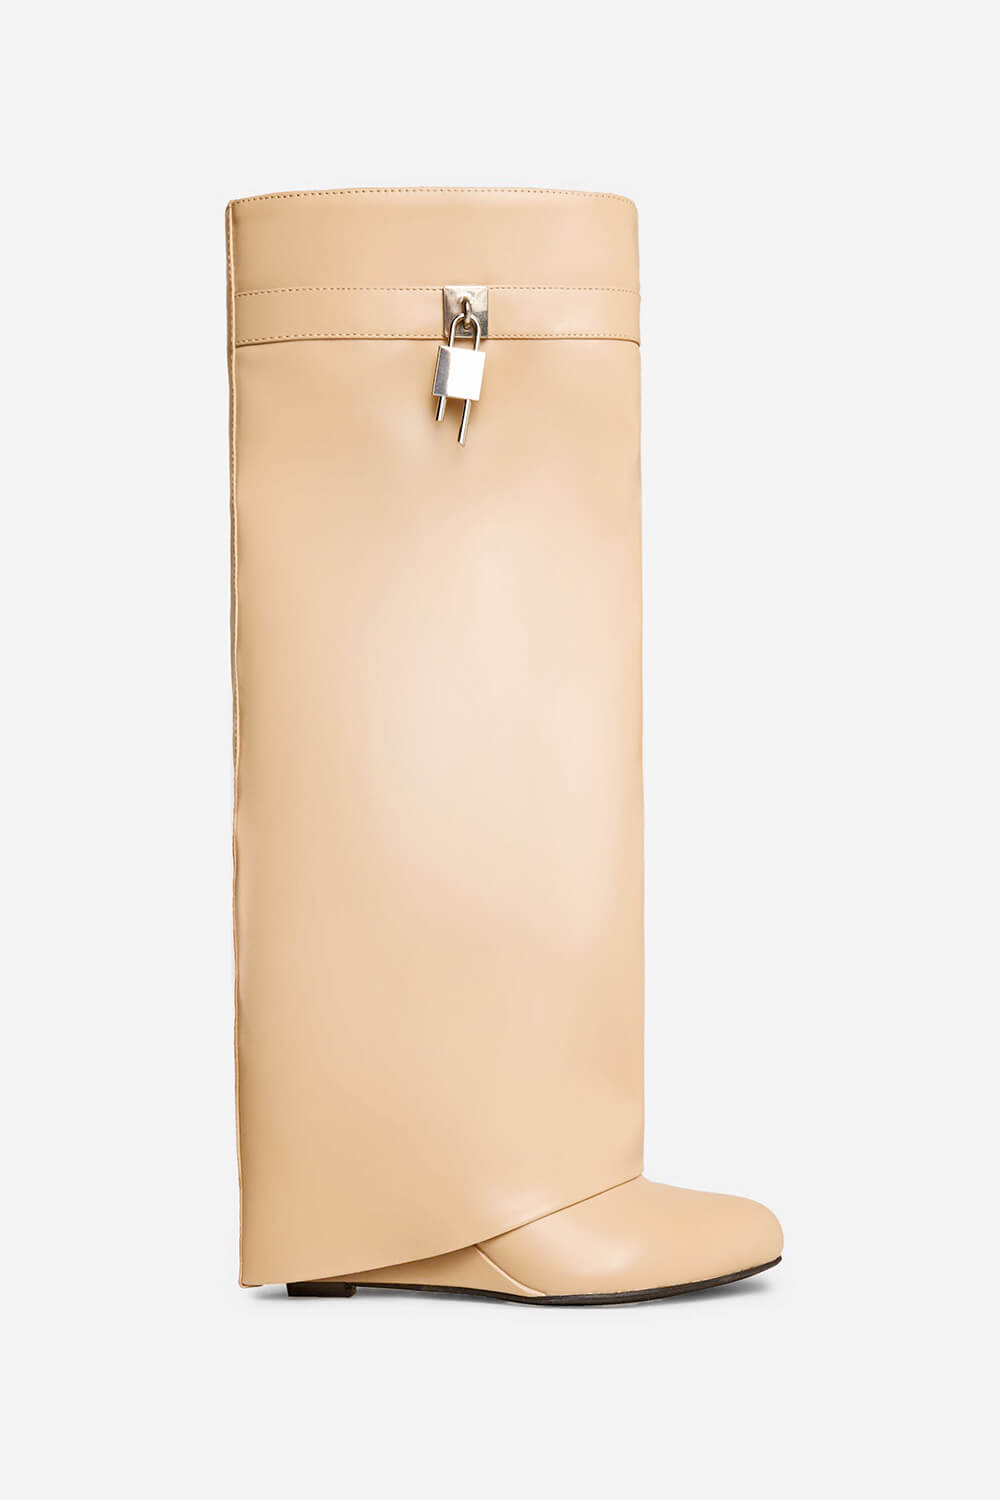 Faux Leather Padlock Detail Folded Wedge Heel Knee High Long Boots - Nude